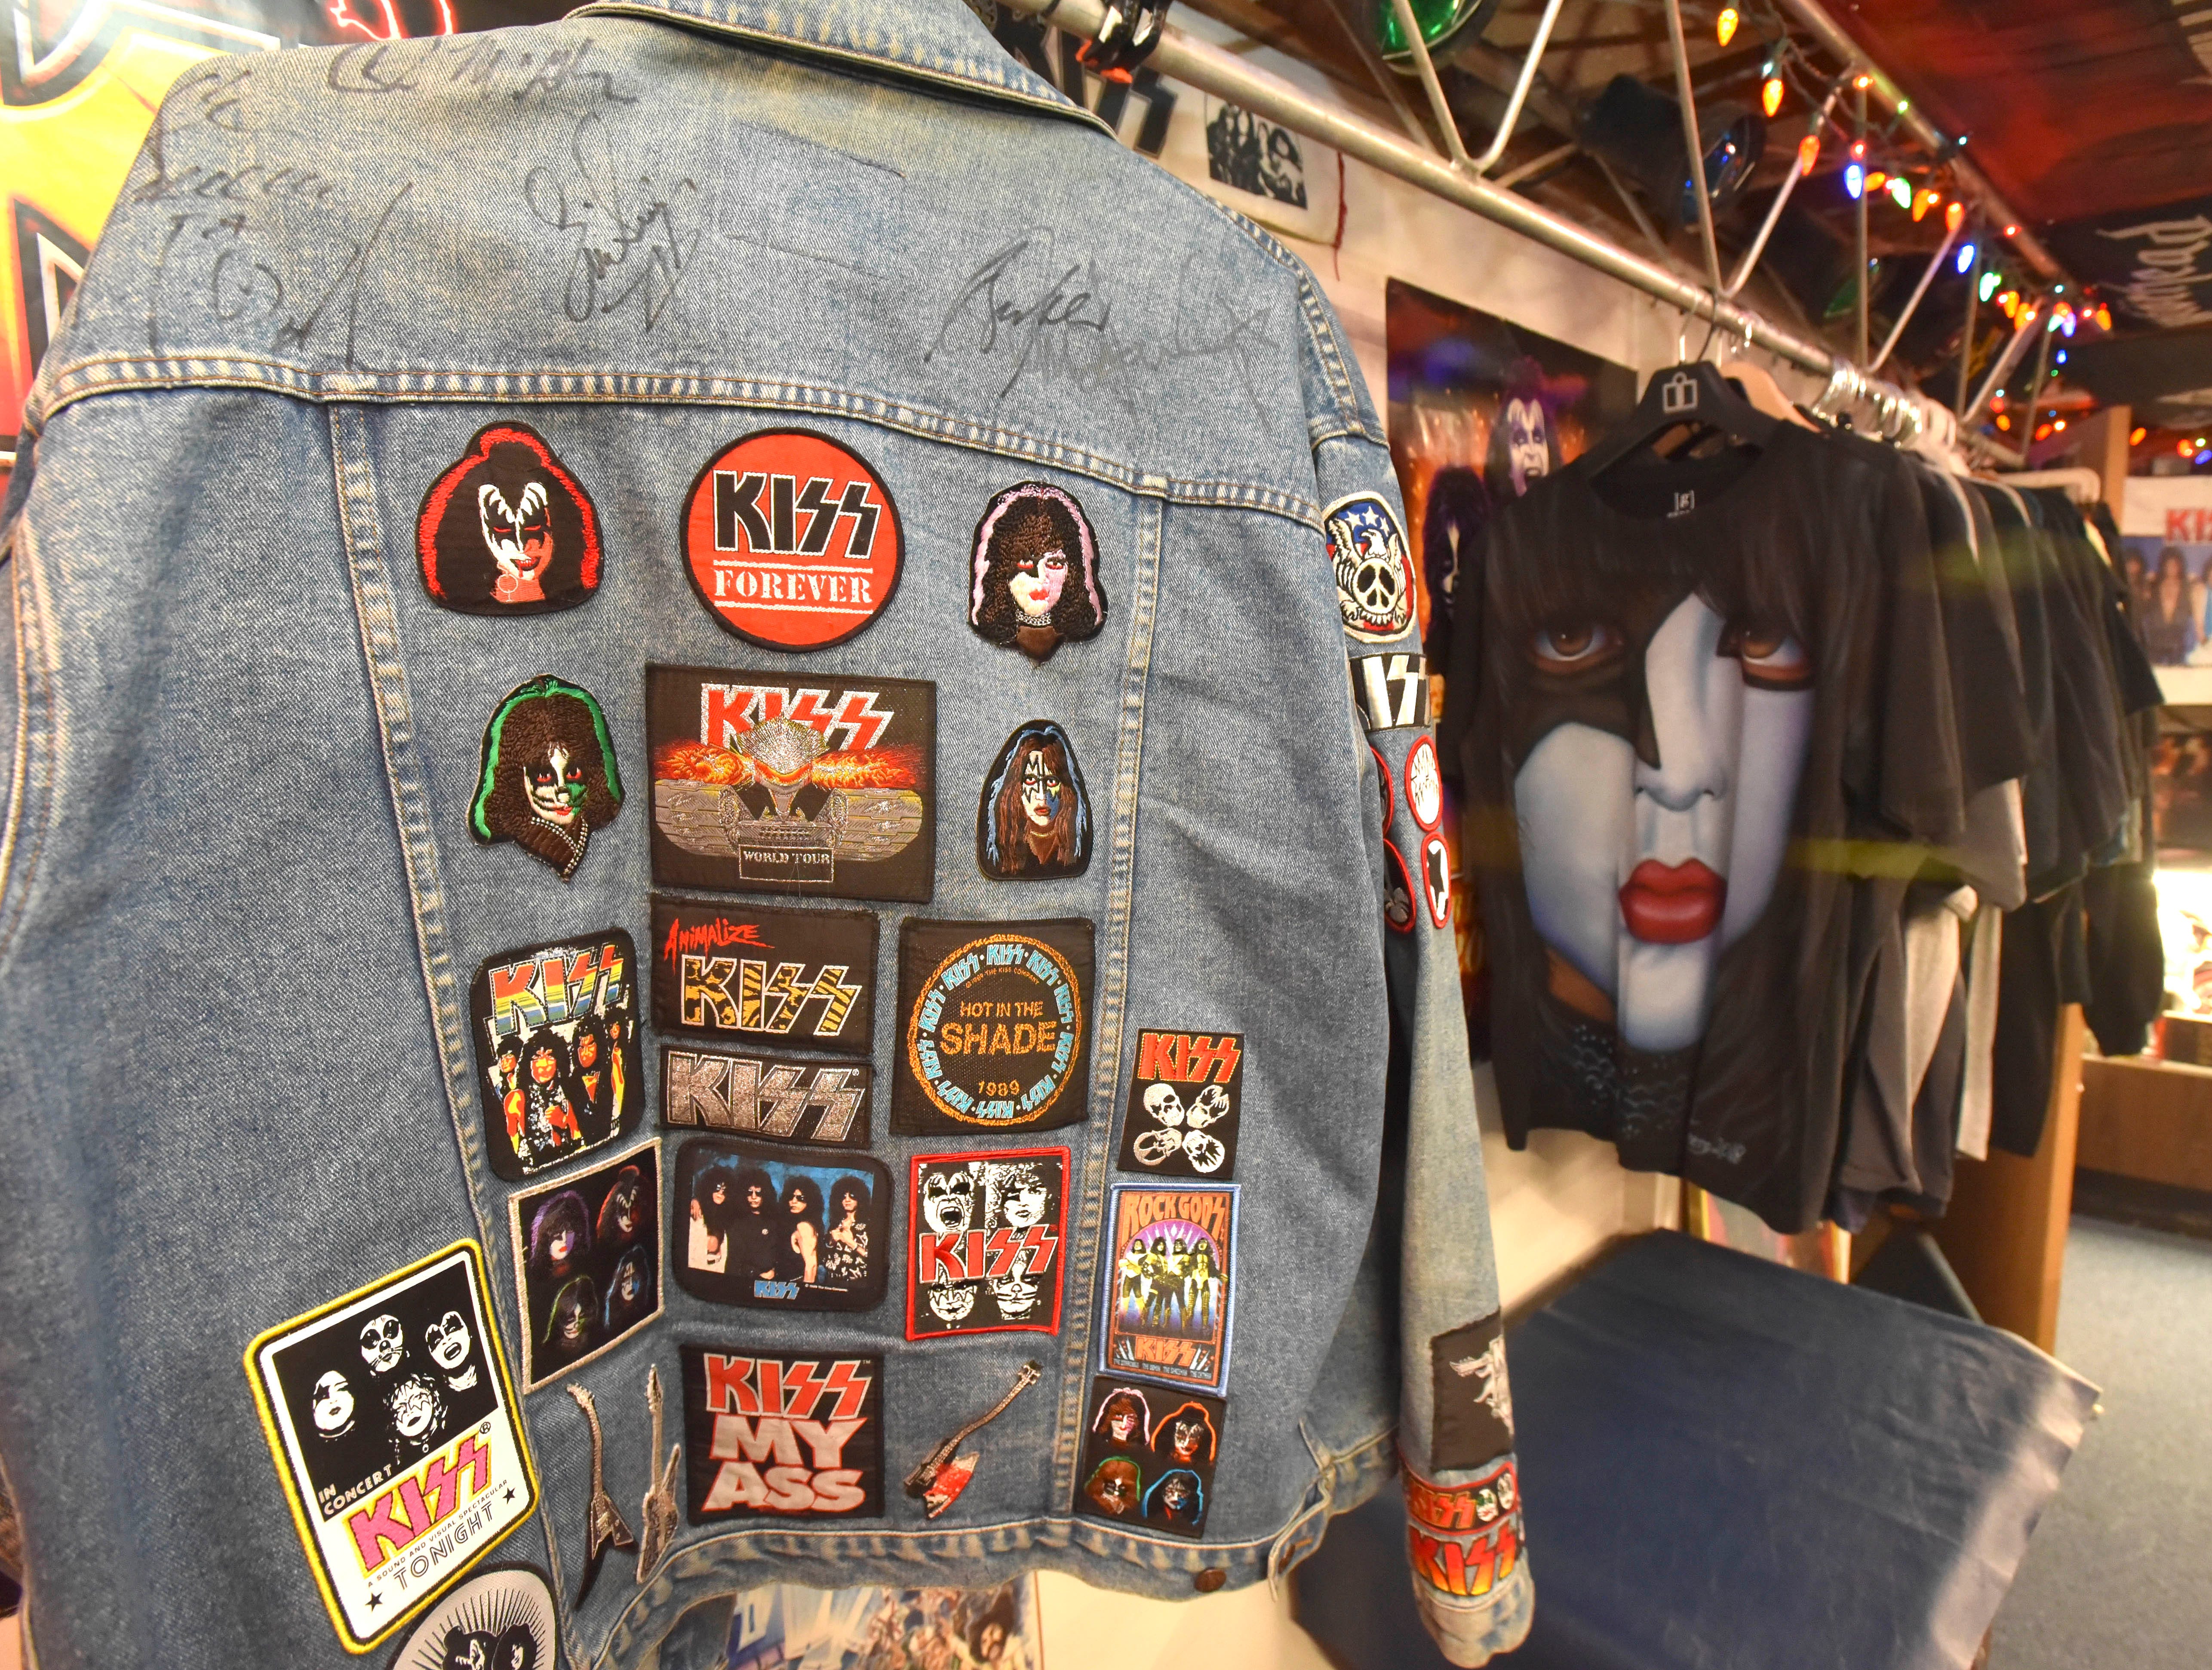 This is Pakulski's KISS jacket with 39 patches.